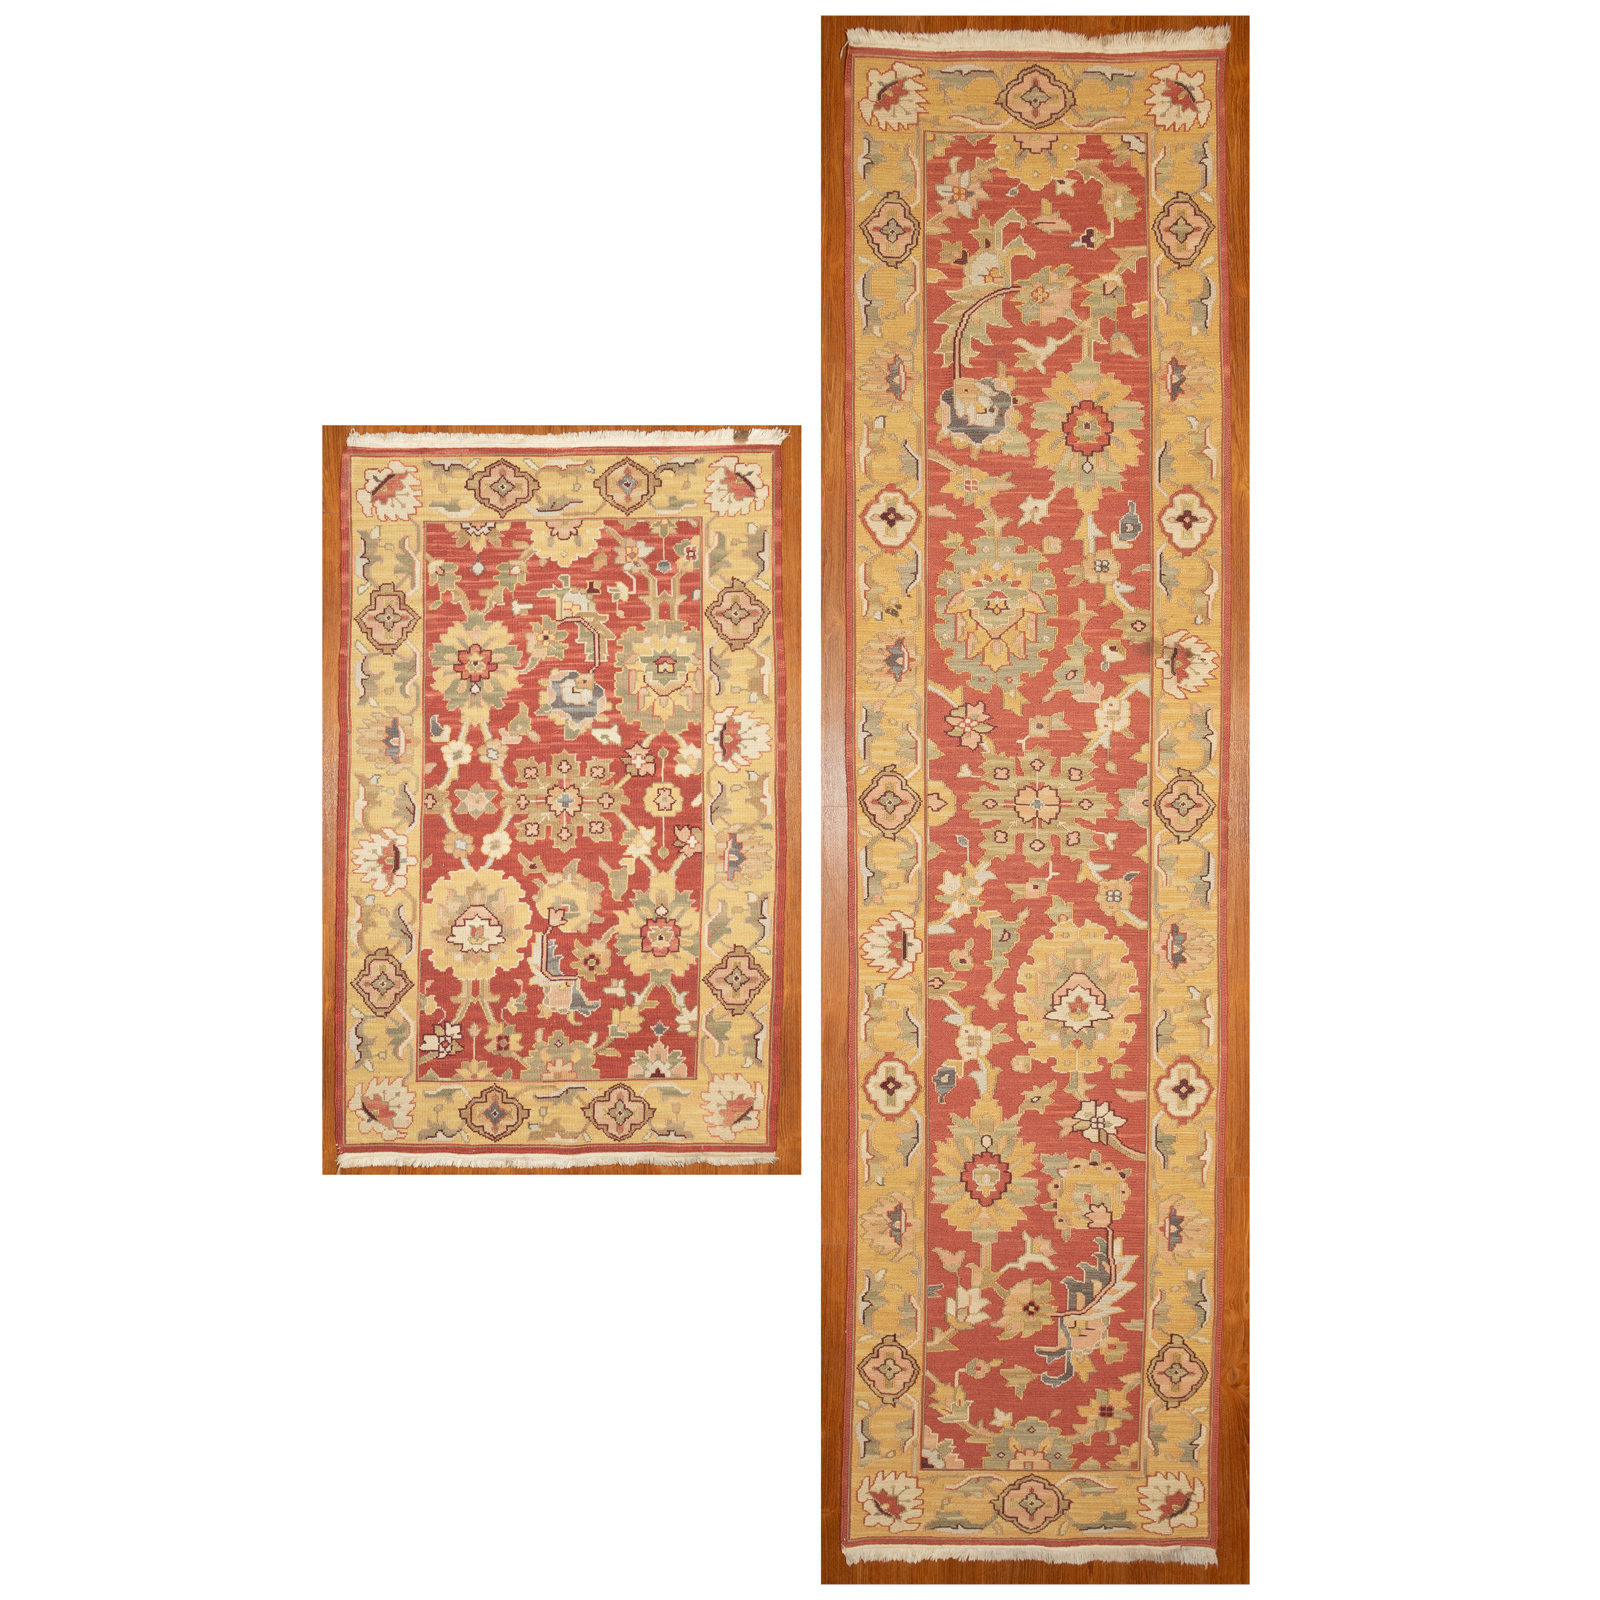 A PAIR OF NOURMAK RUGS, CHINA,